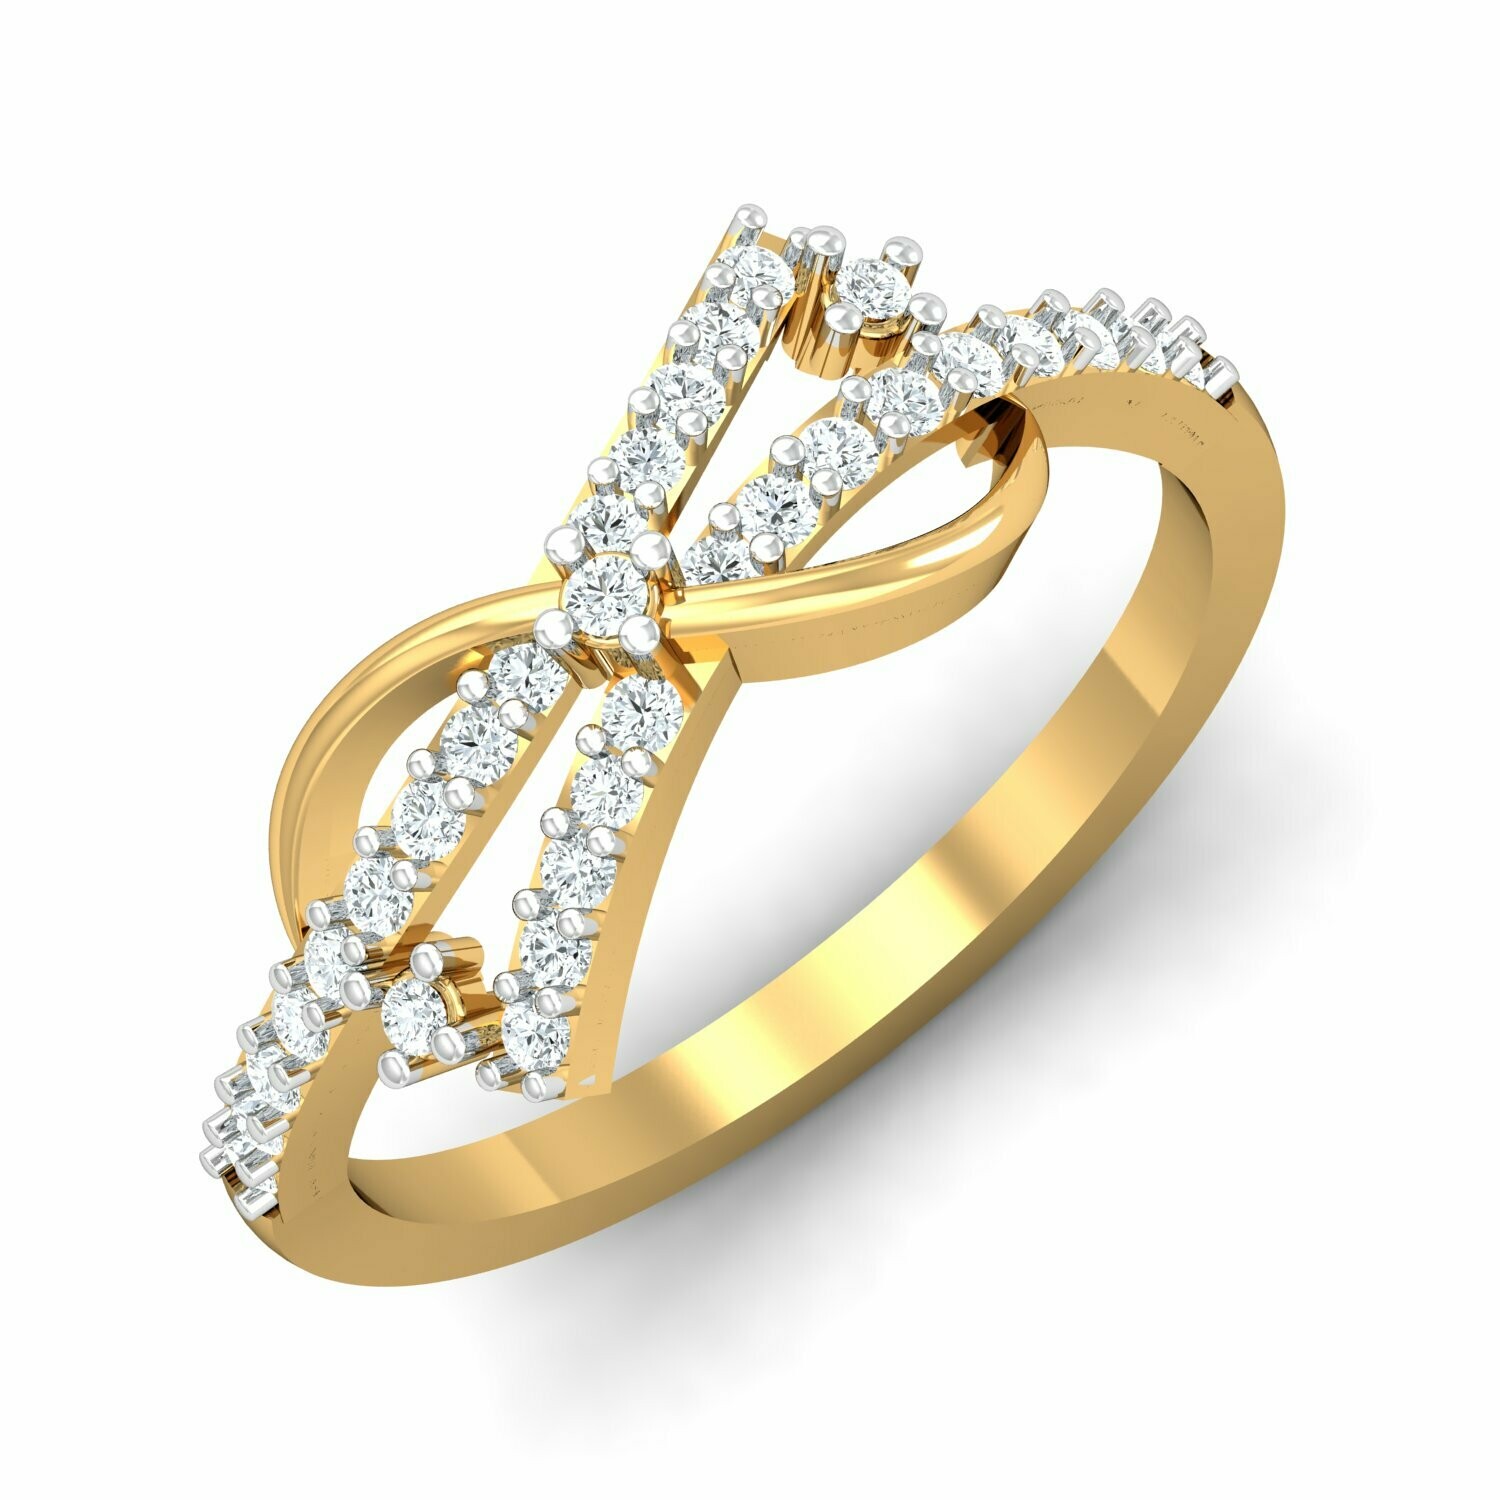 3D CAD jewelry model diamond engagement ring